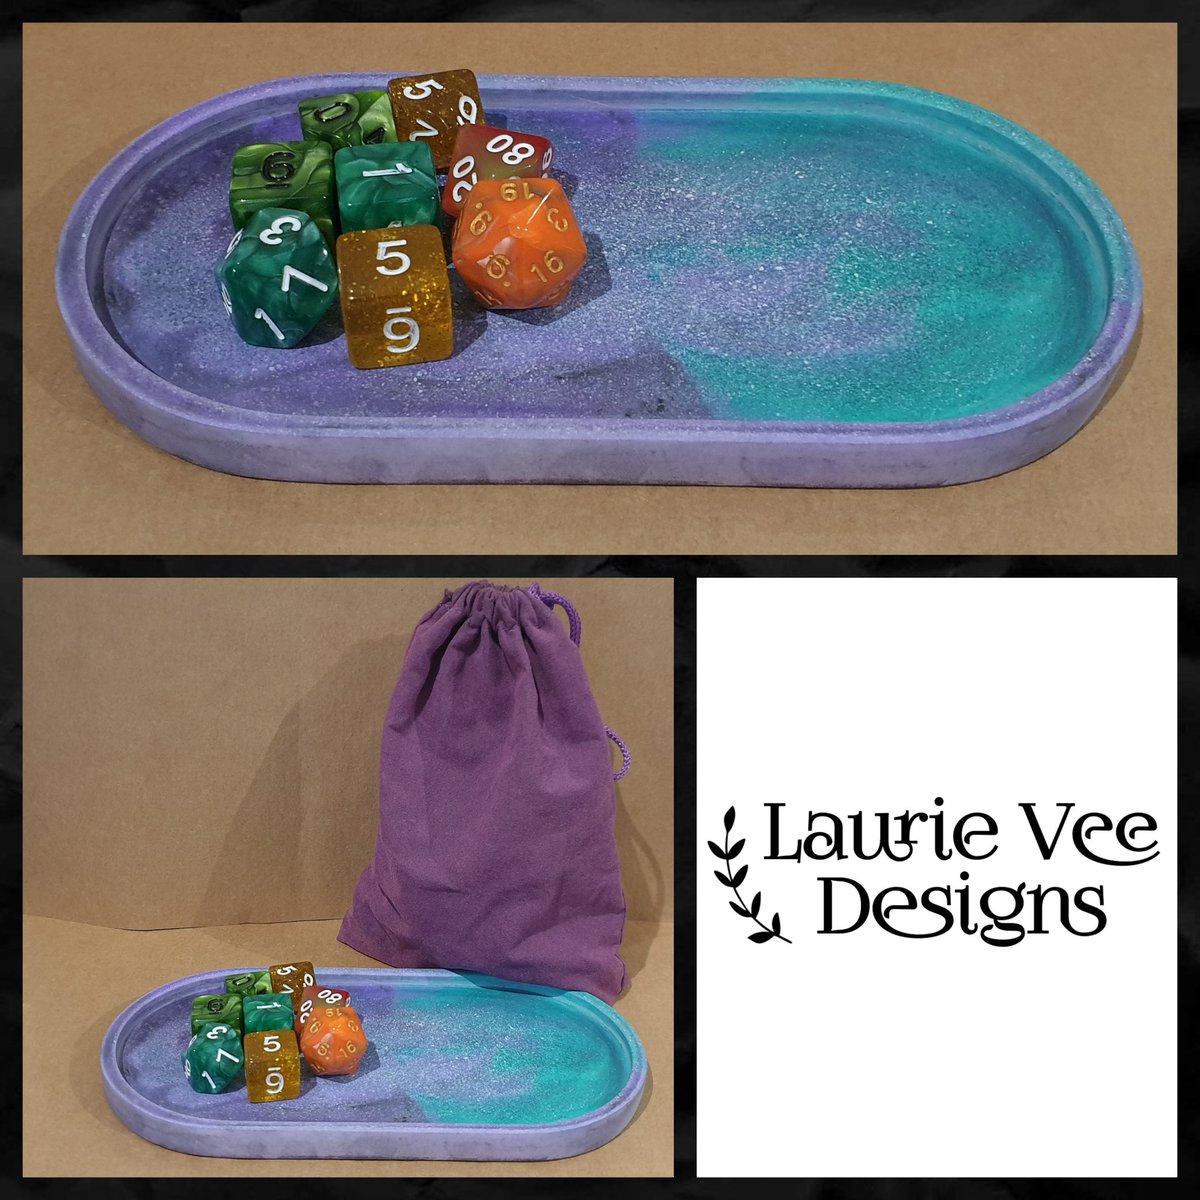 Dice roll please... Introducing our galactic trinket dish, with beeswax finish. (Dice and pouch not included) £18 +p&p
#familybusiness #smallbusiness #gift #devon #giftshop #online #games #dice #trinketdish